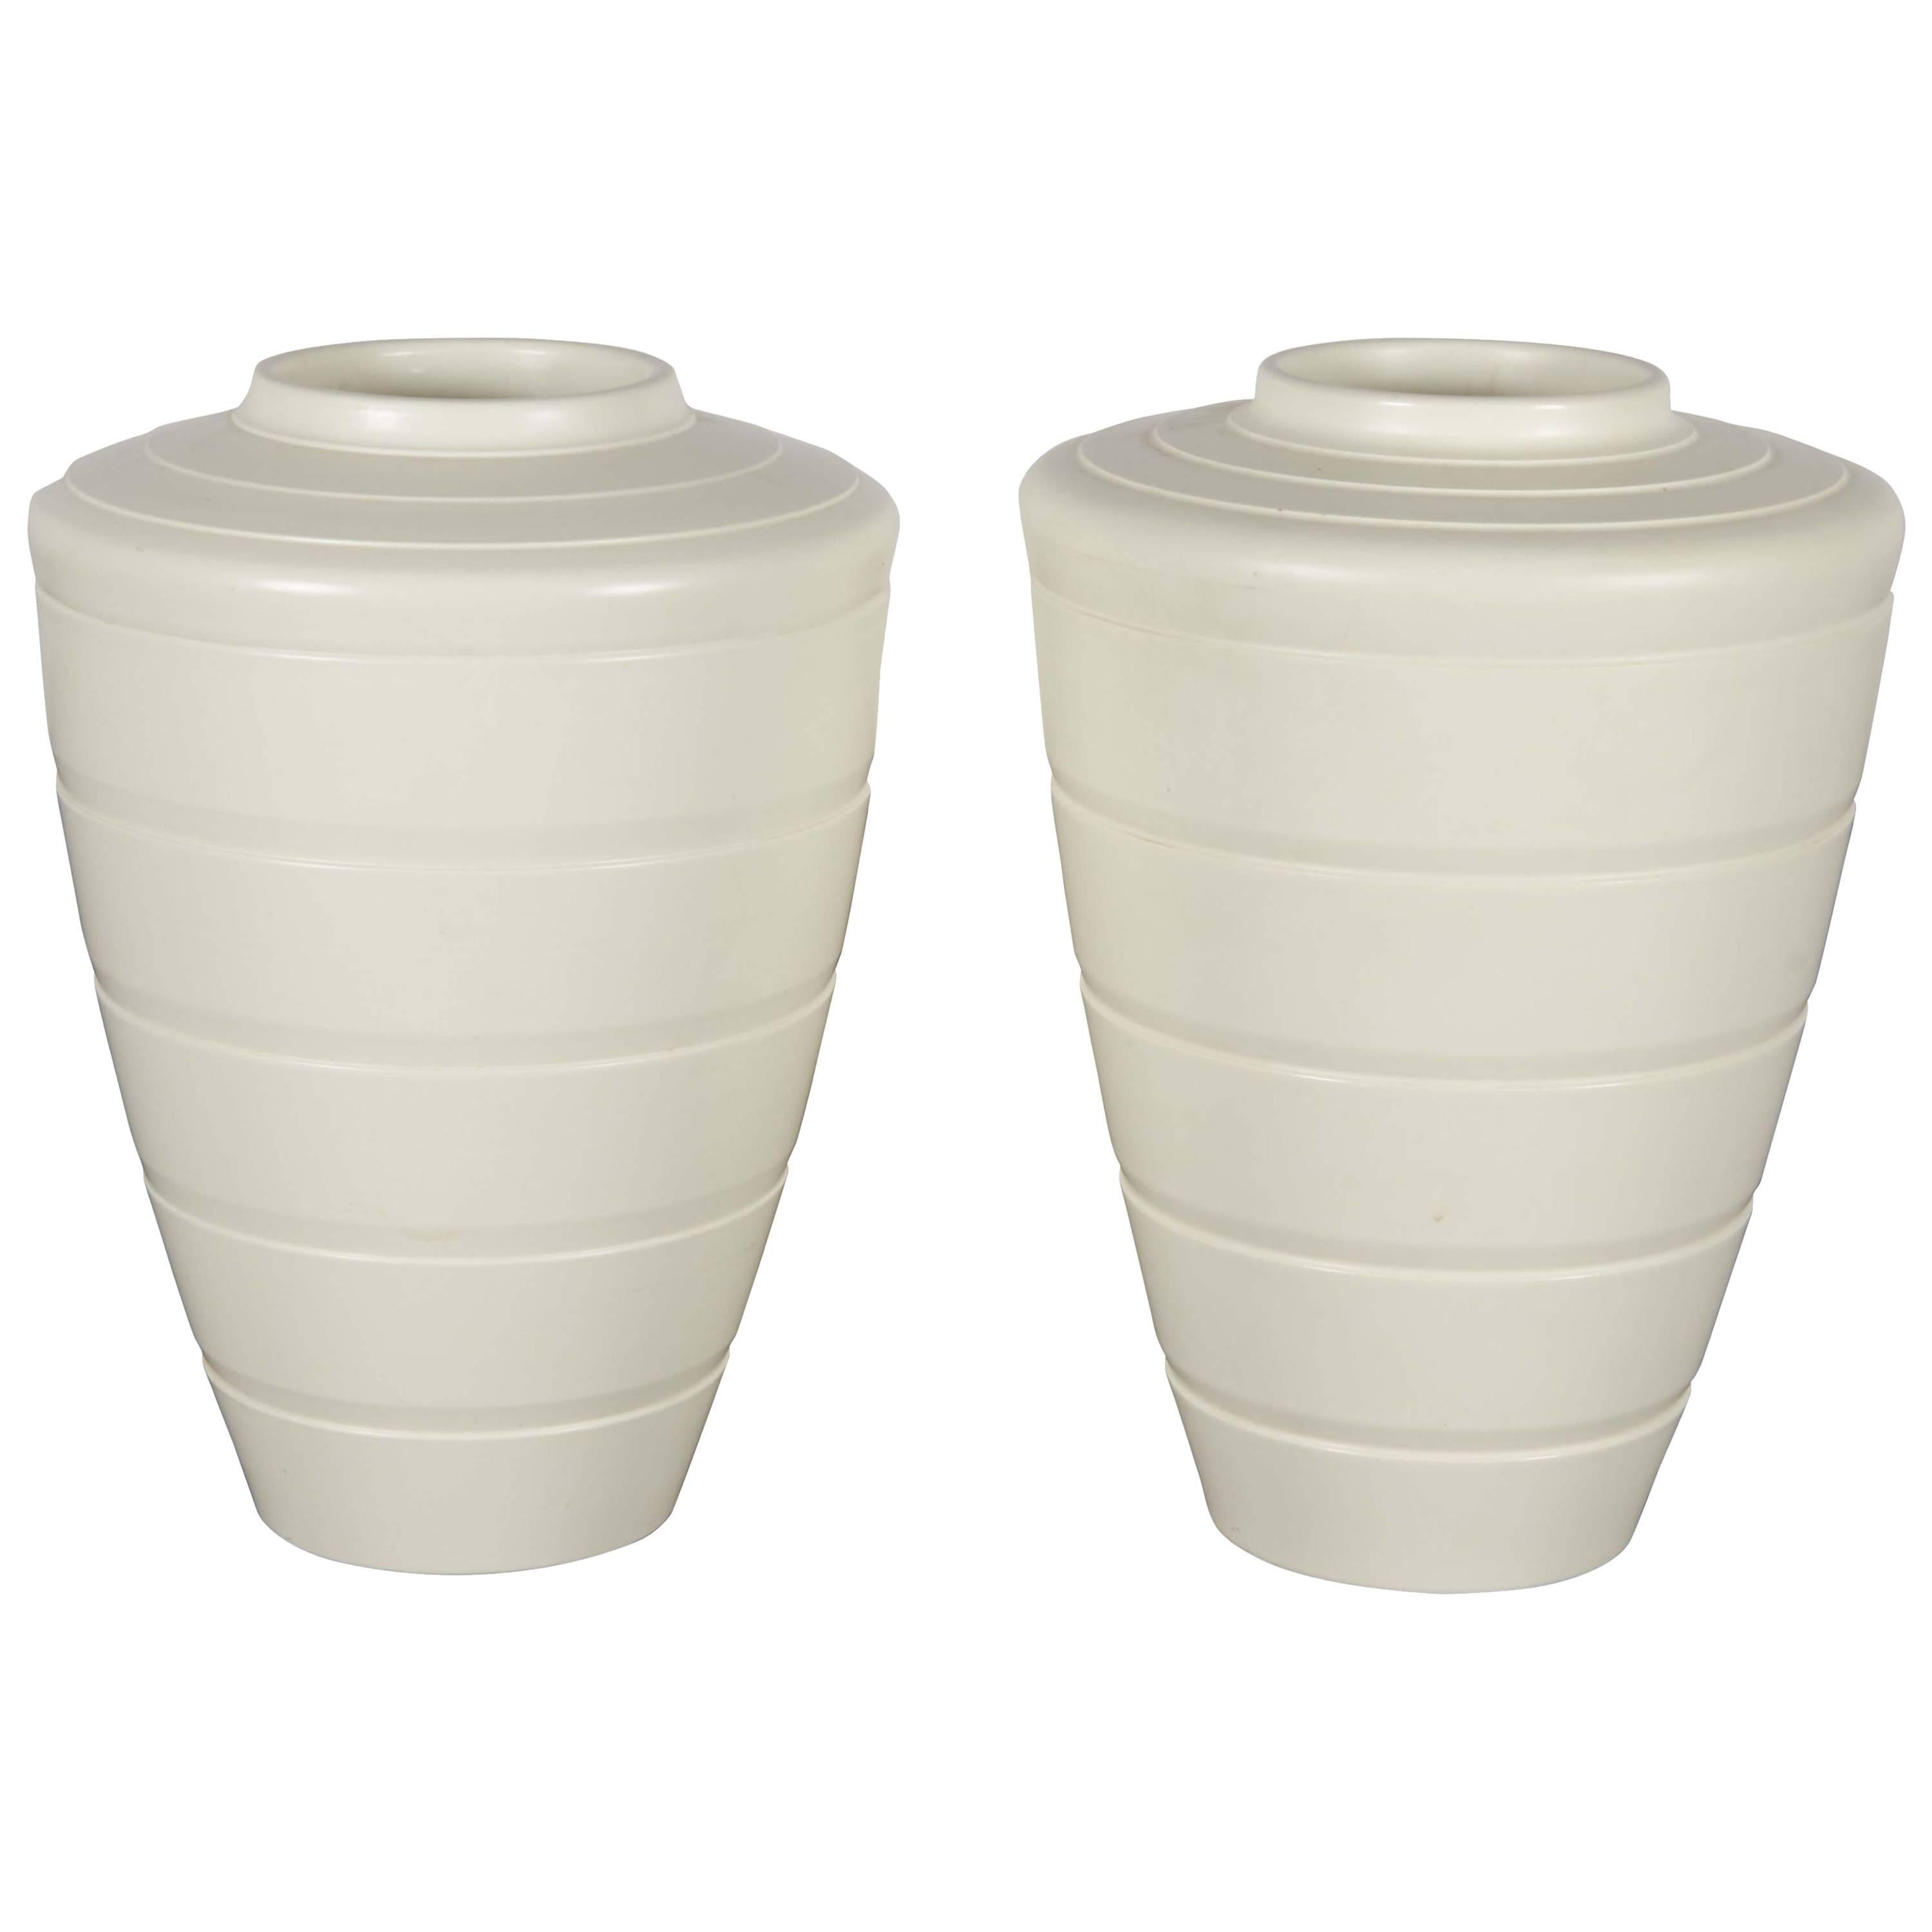 Pair of White Vases by Keith Murray for Wedgwood